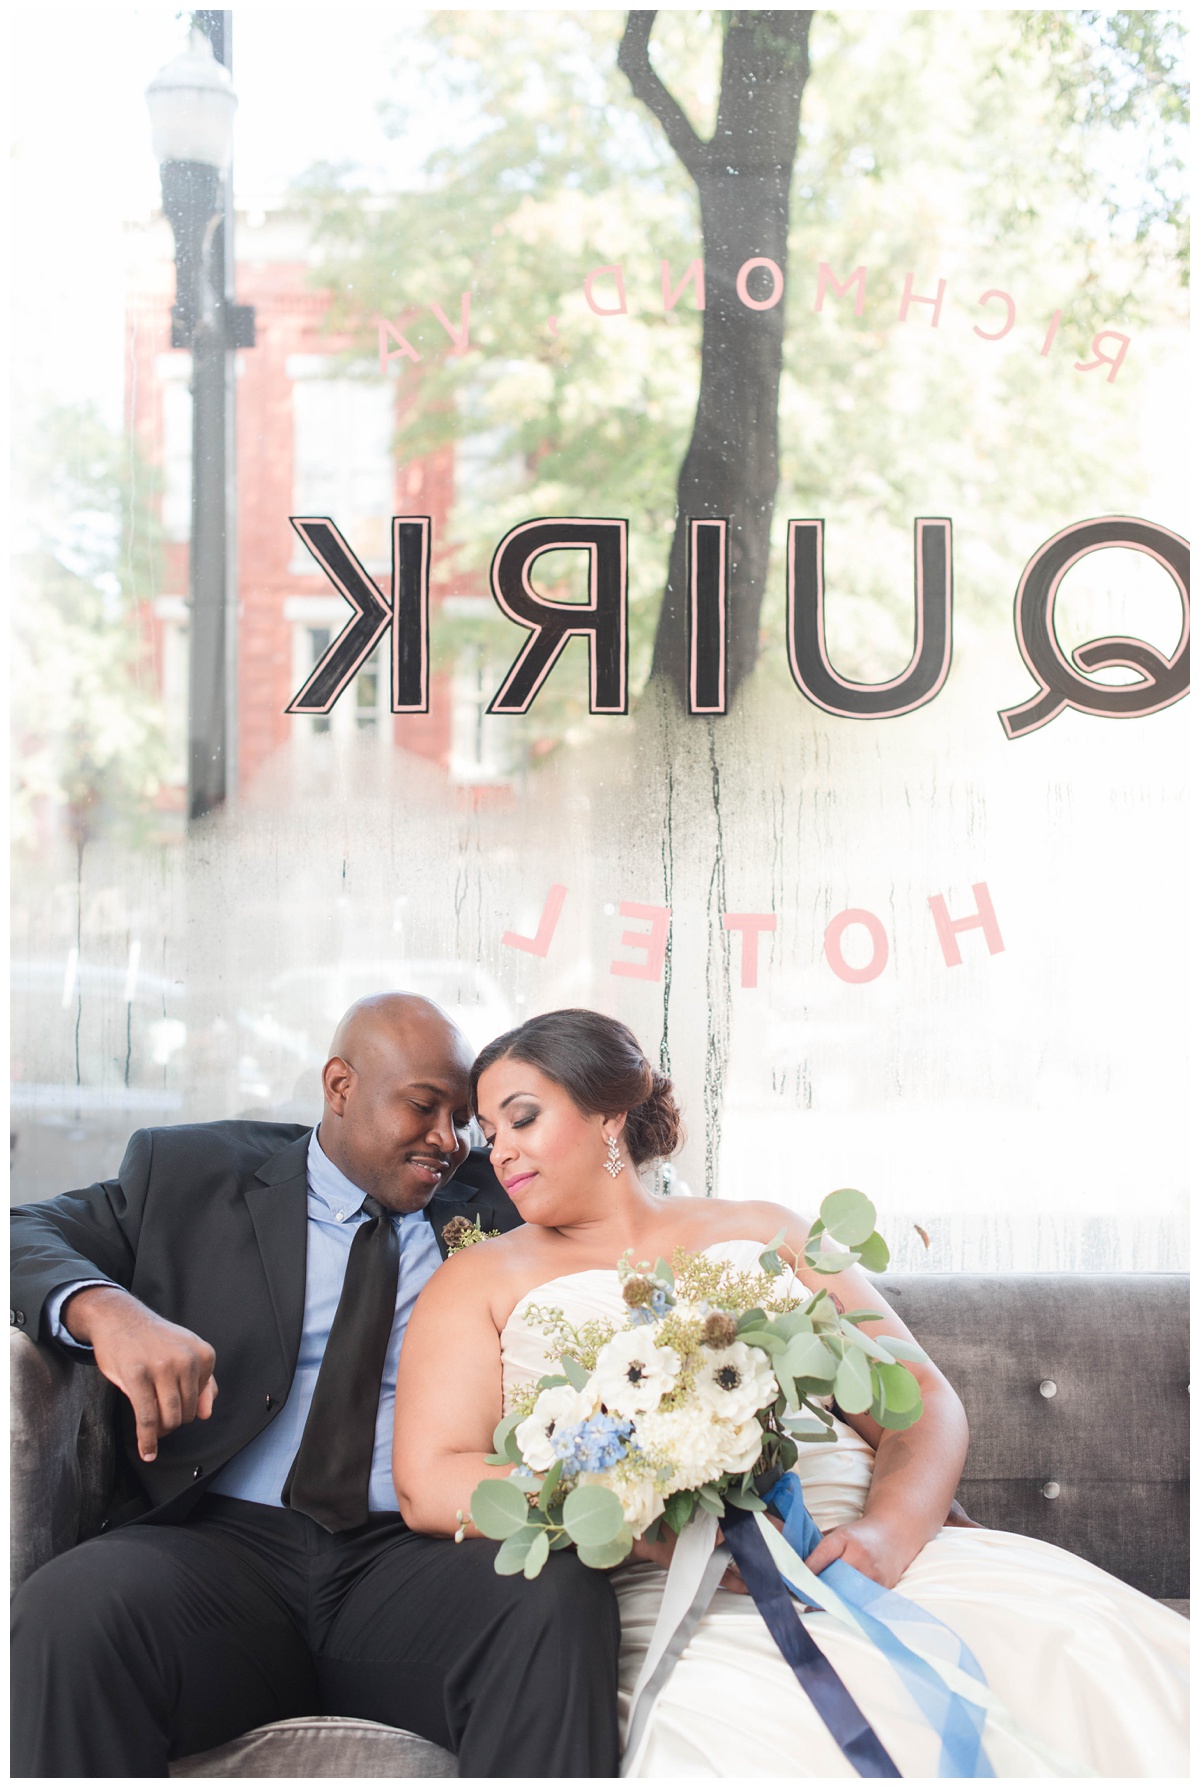 shades of blue wedding inspiration at quirk hotel in richmond virginia by rva wedding photographer sarah & dave photography bride and groom sitting on iconic quirk hotel couch rva virginia wedding blue wedding inspo ideas